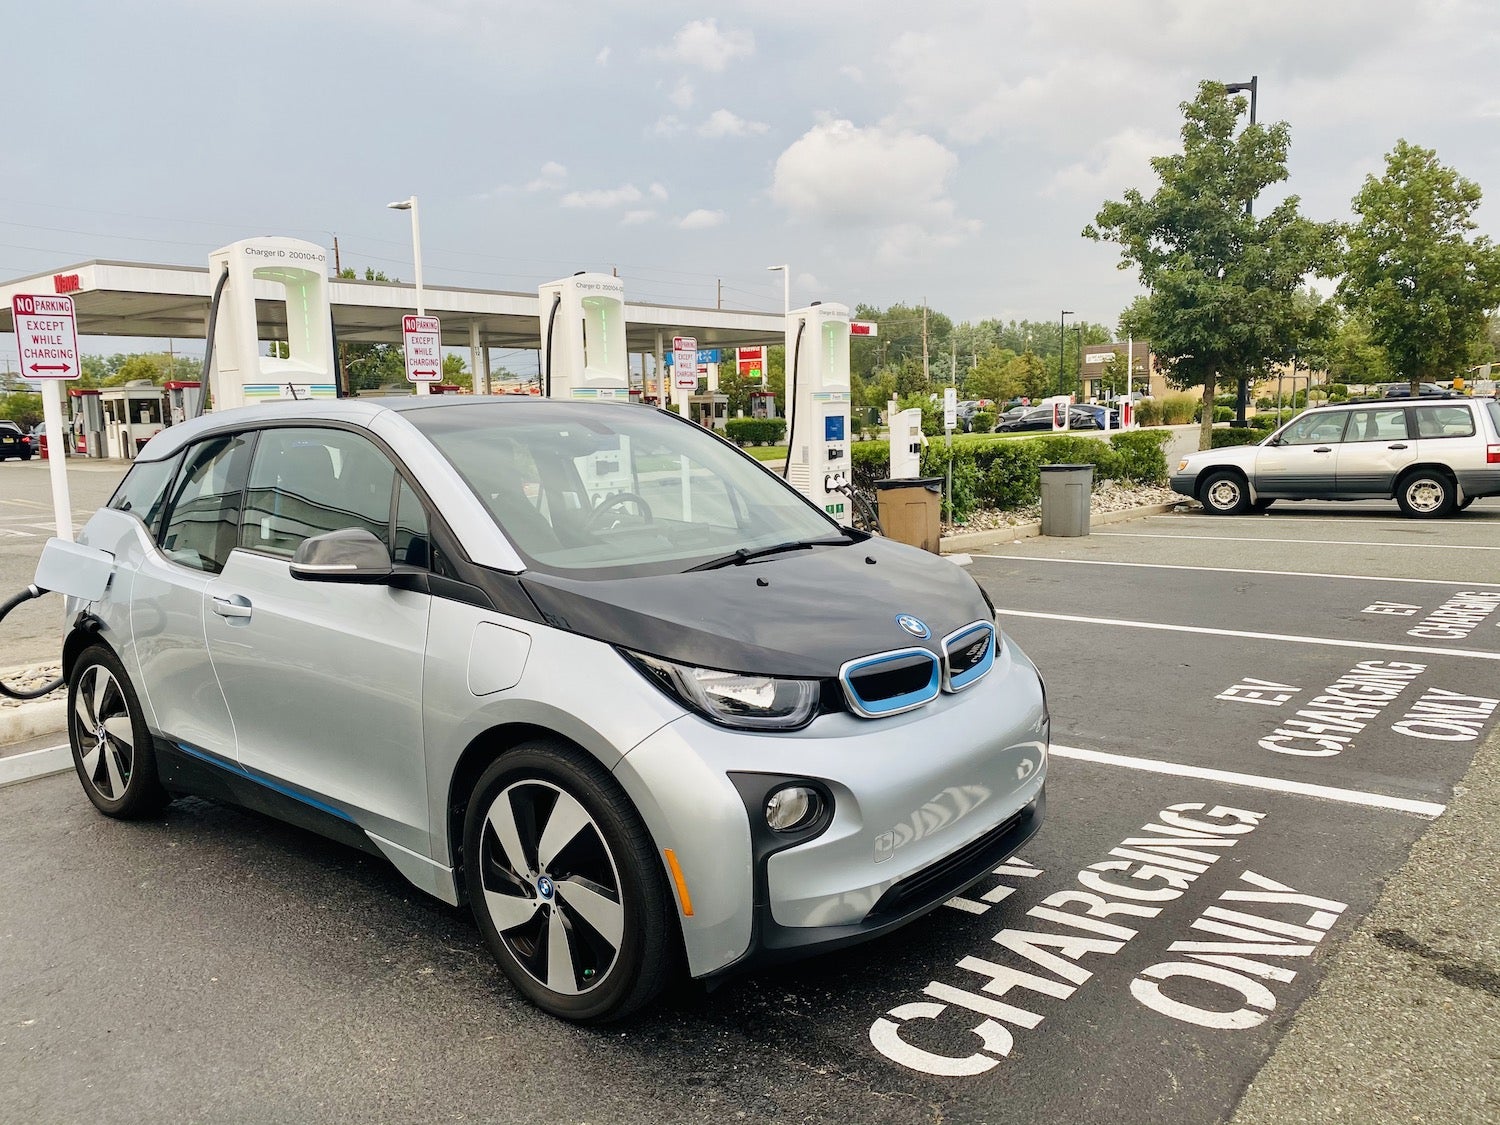 BMW i3 charging at a public charger